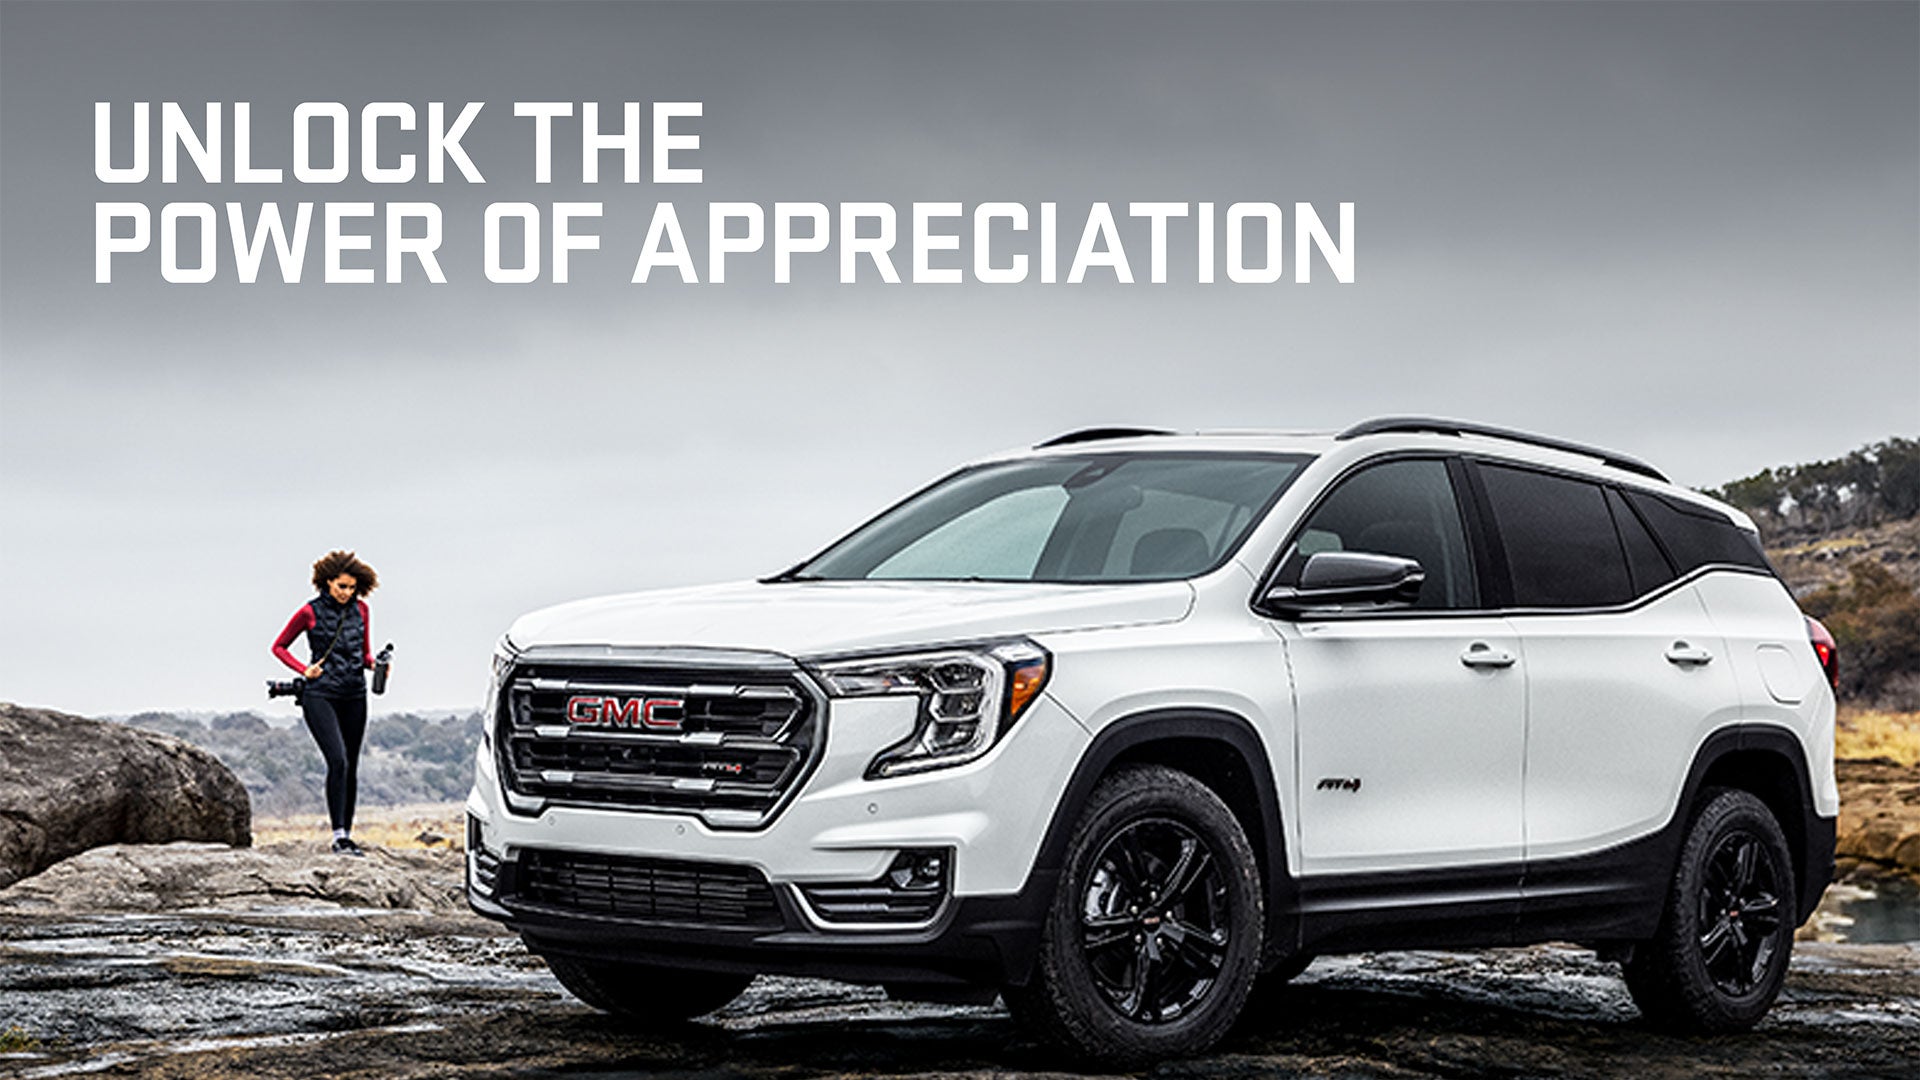 Unlock the power of appreciation | Andy Mohr Buick GMC in Fishers IN